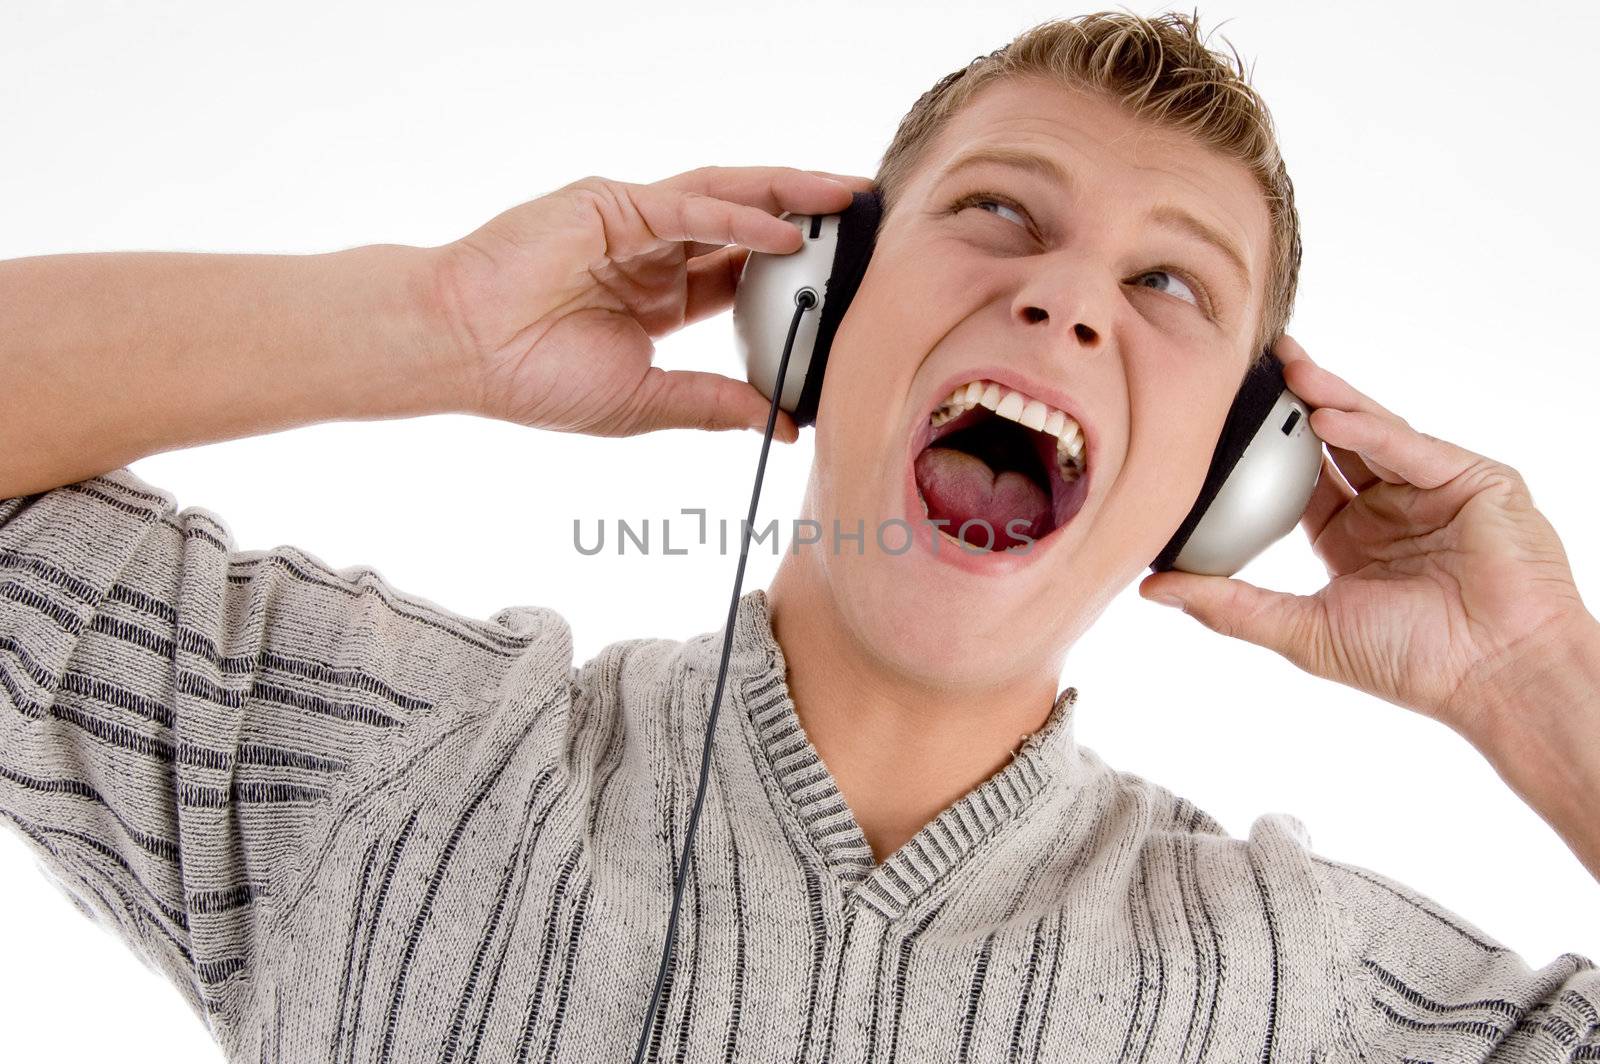 shouting man with headphone looking upward by imagerymajestic